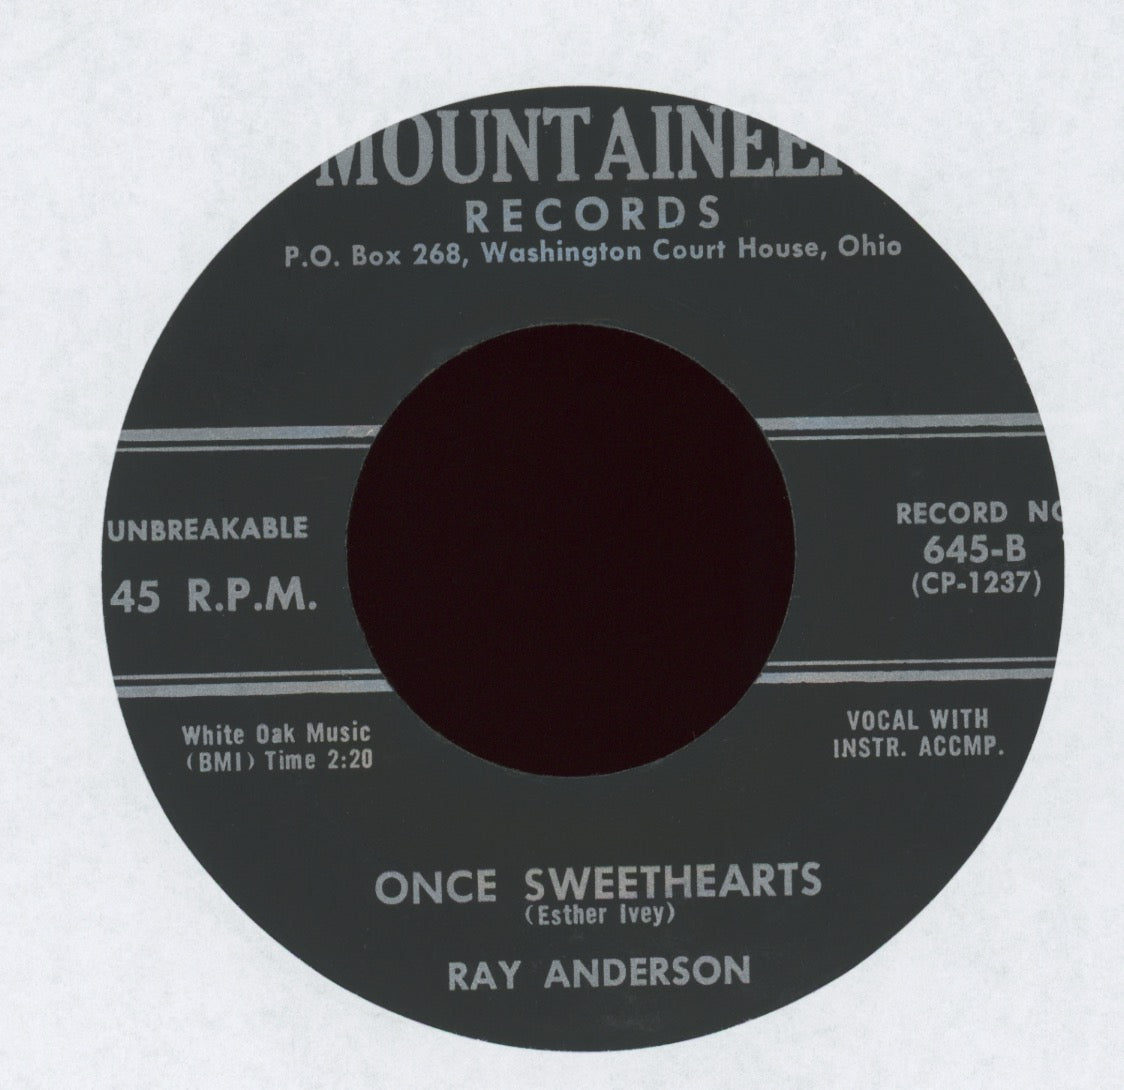 Ray Anderson - Those Old Hands on Mountaineer